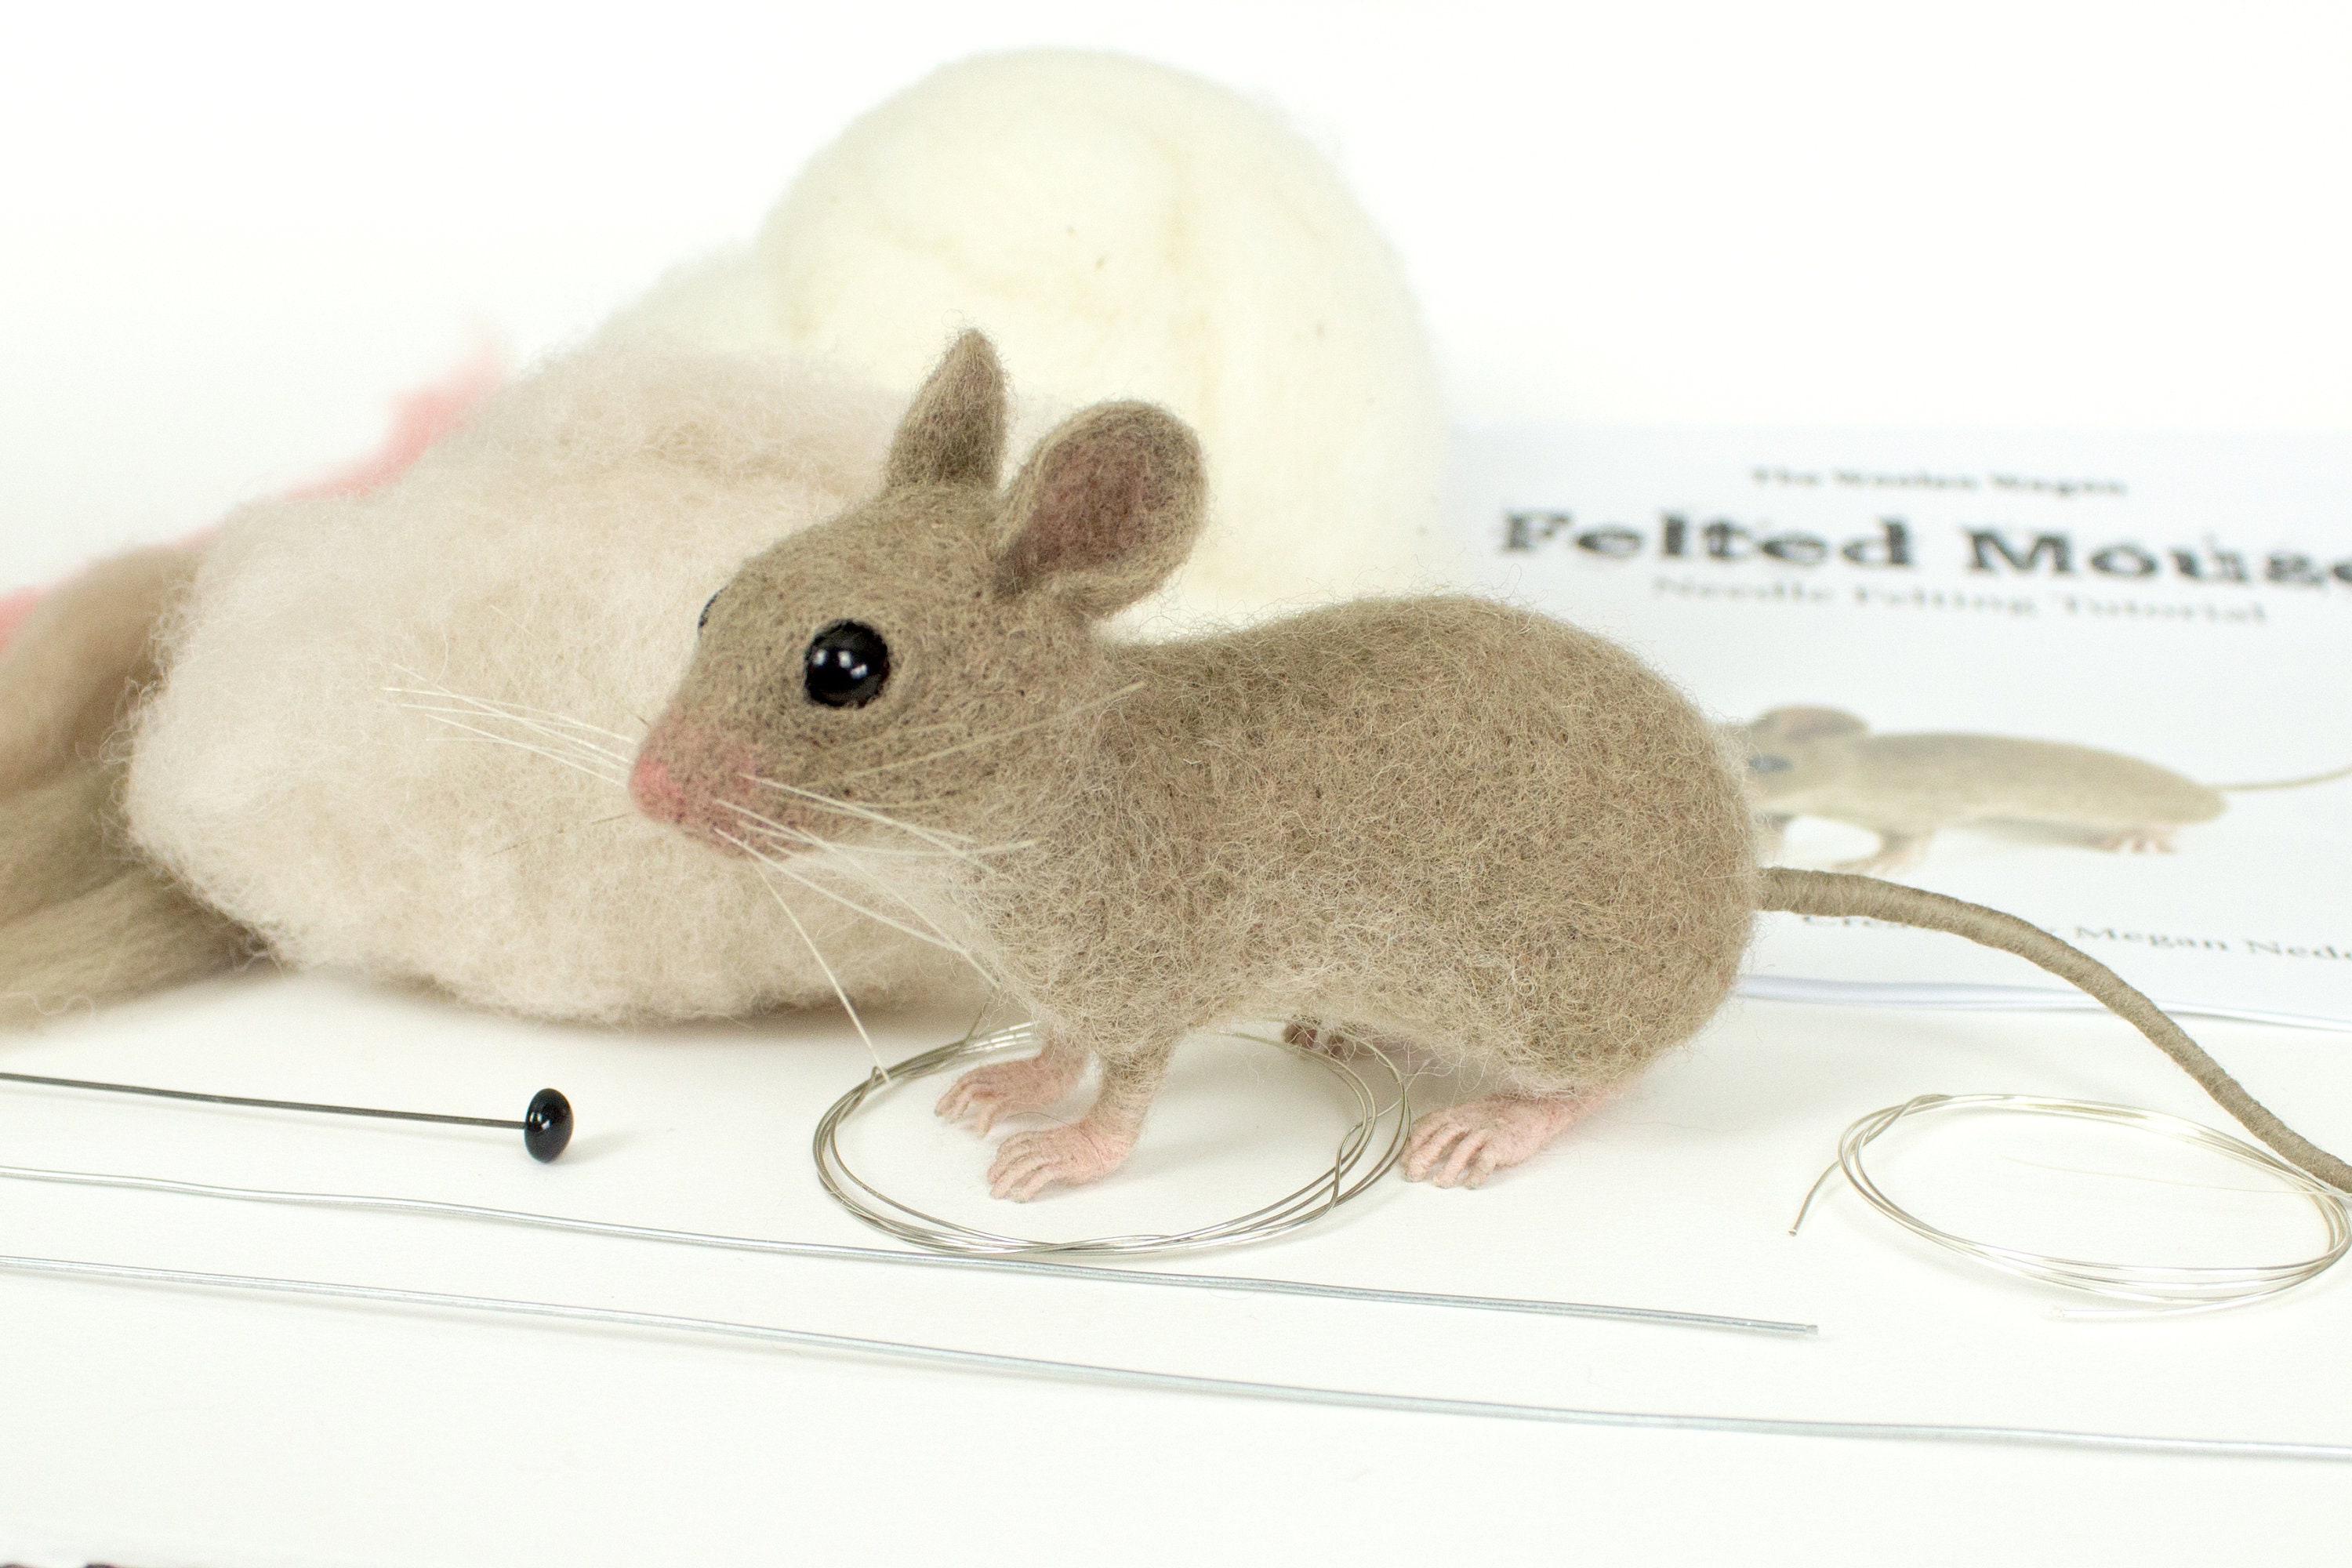 Needle Felting Kit Mouse Learn to Make TWO Cute Mice. Craft Kits for Adults.  A Project for Beginners and a Creative Gift Idea. 